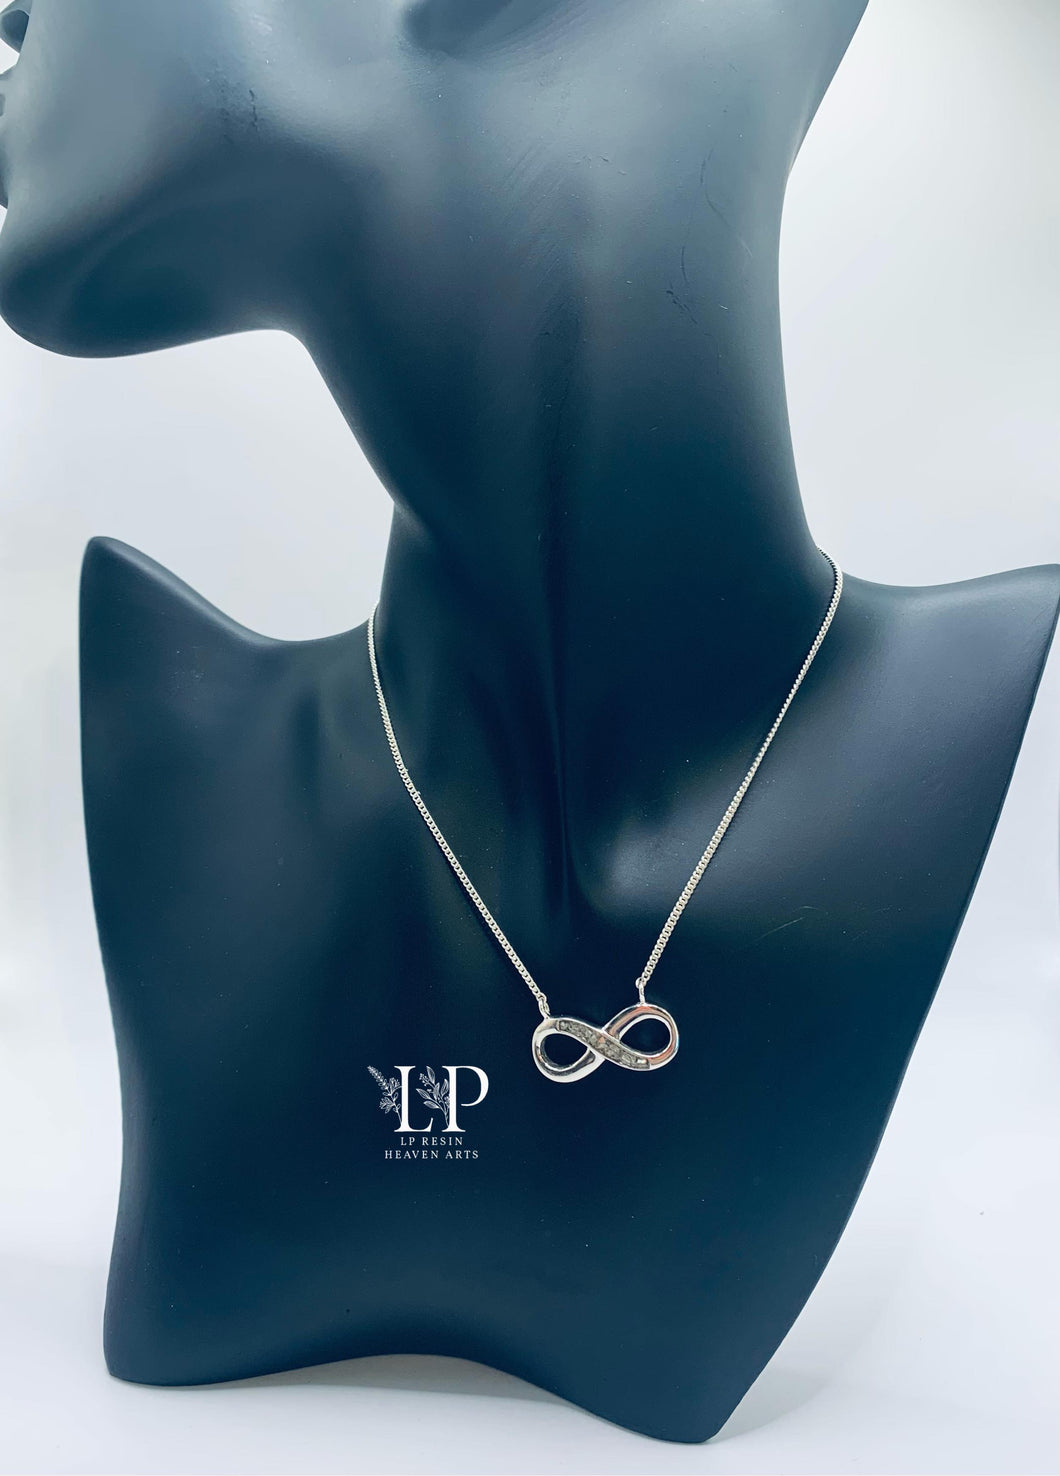 The infinity pendant with fixed adjustable chain silver